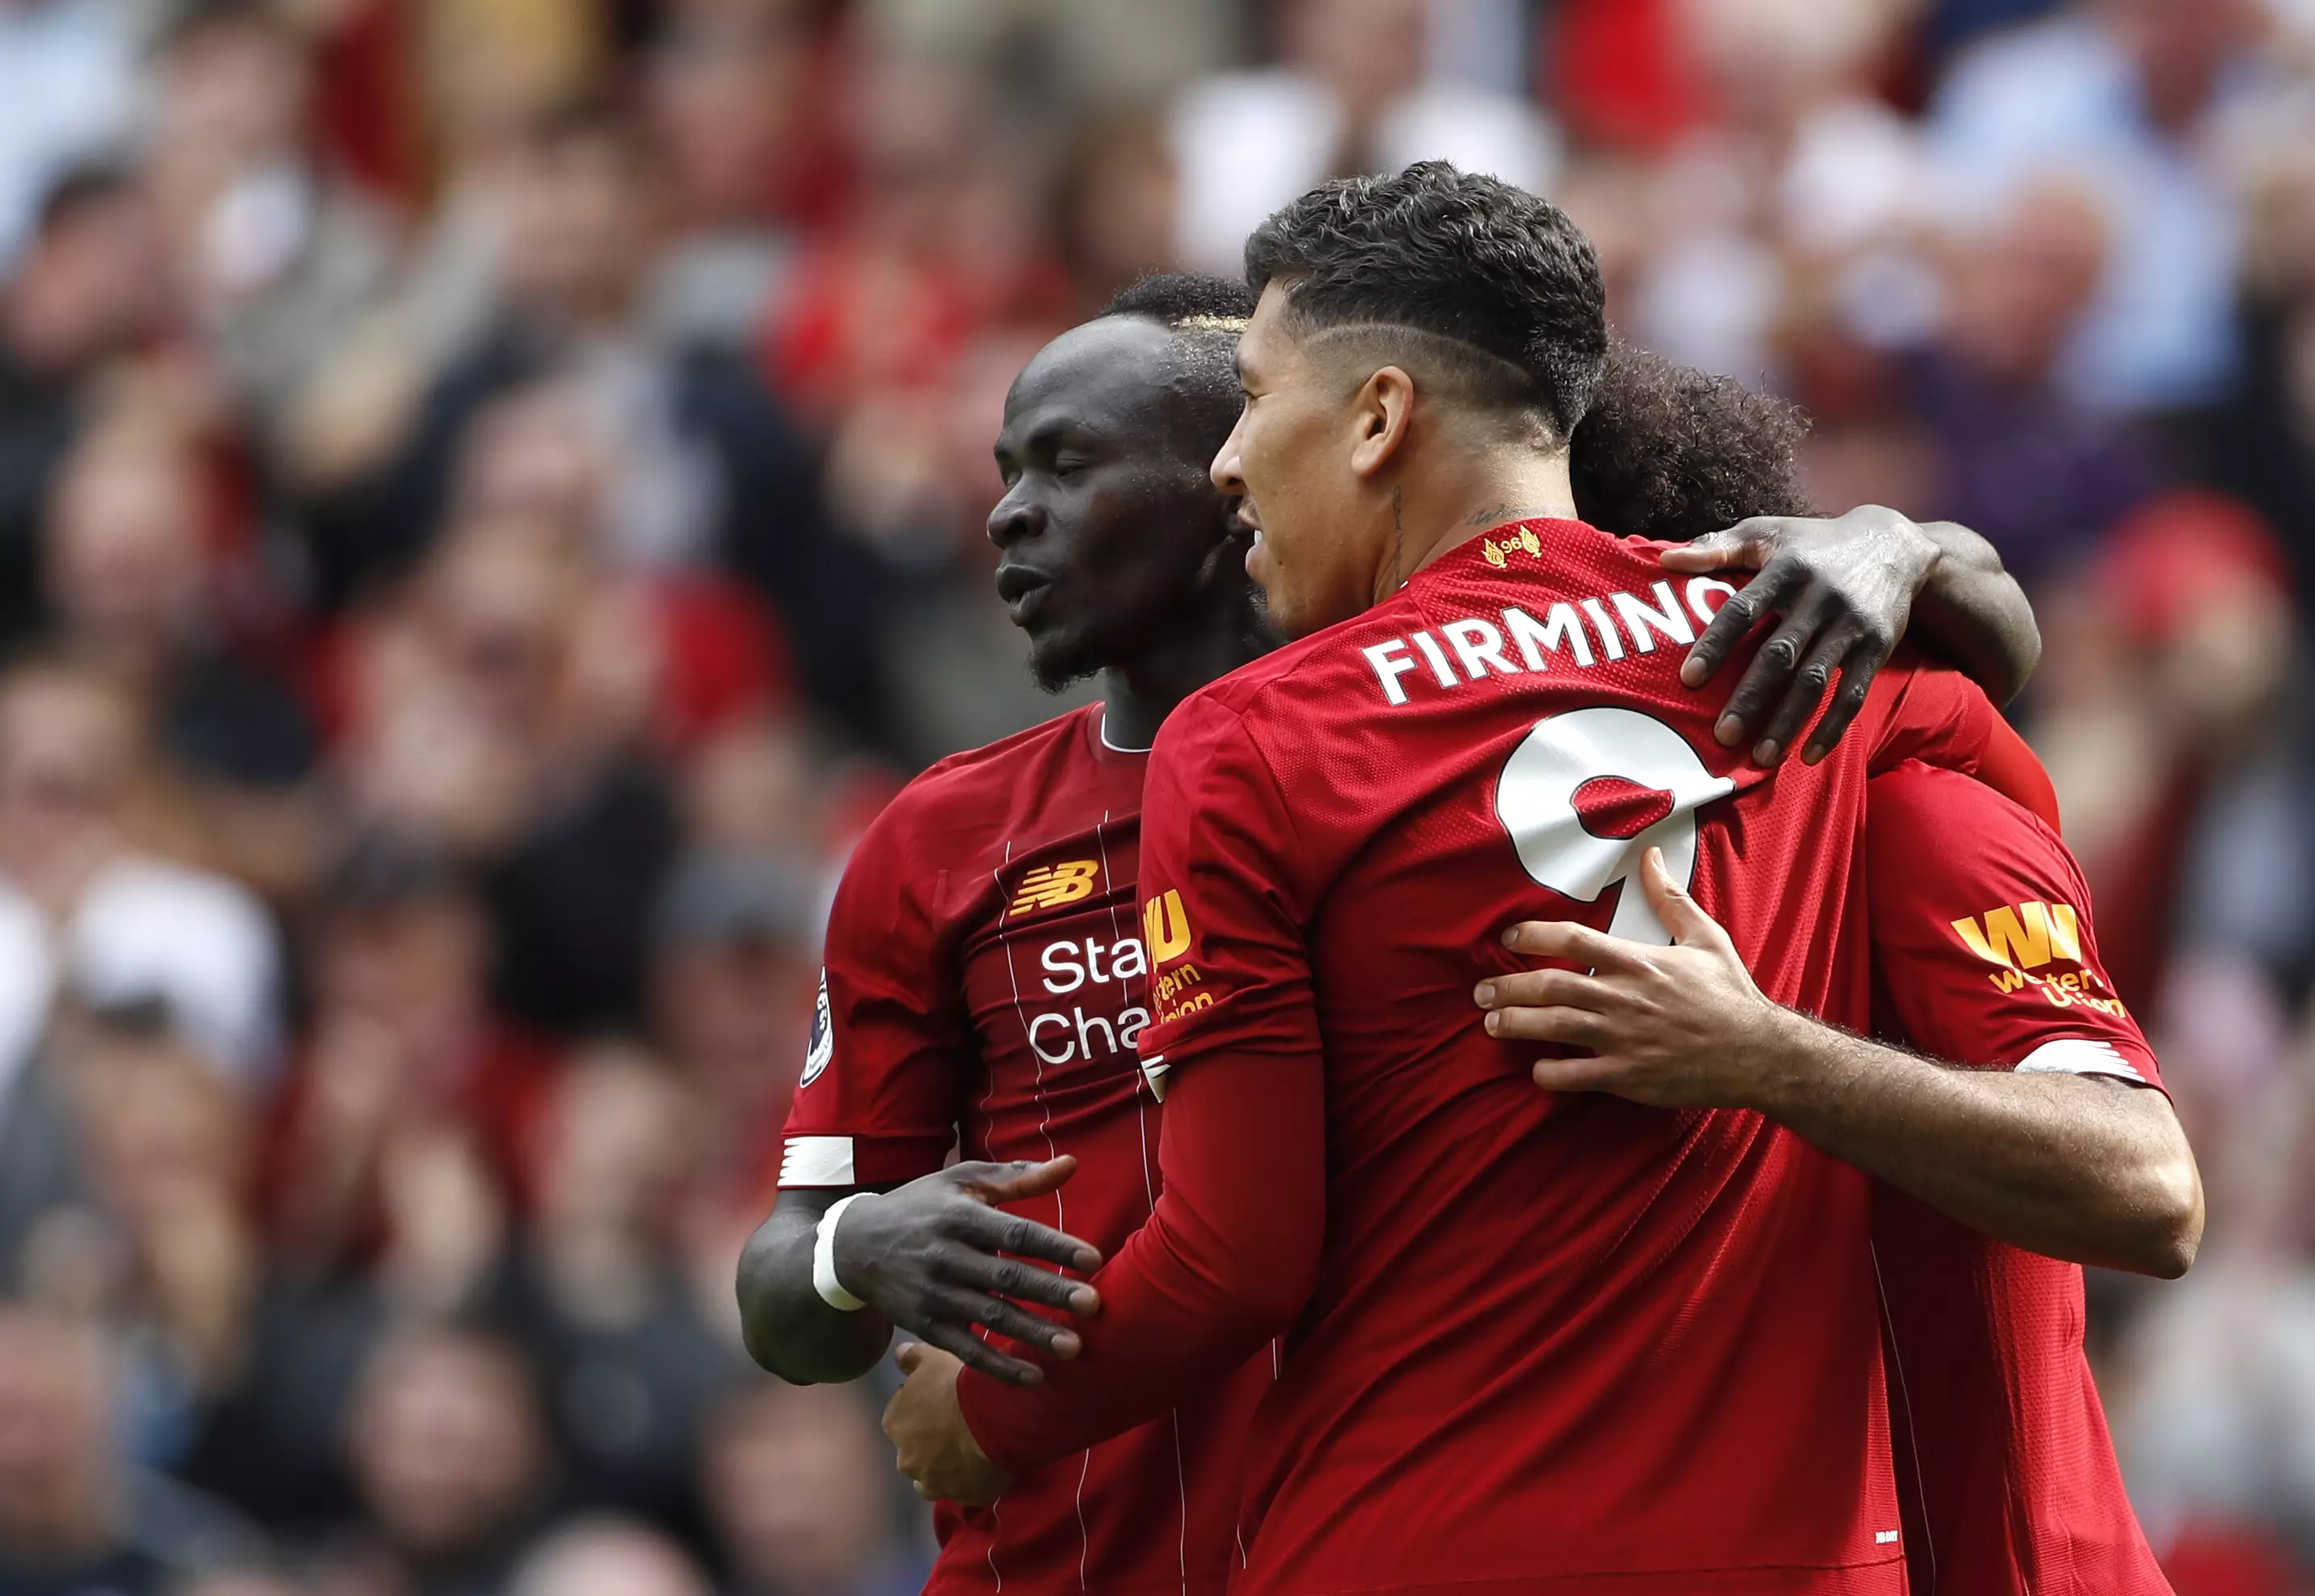 Sadio Mane, Mo Salah and Roberto Firmino have formed a deadly trio up front for Liverpool